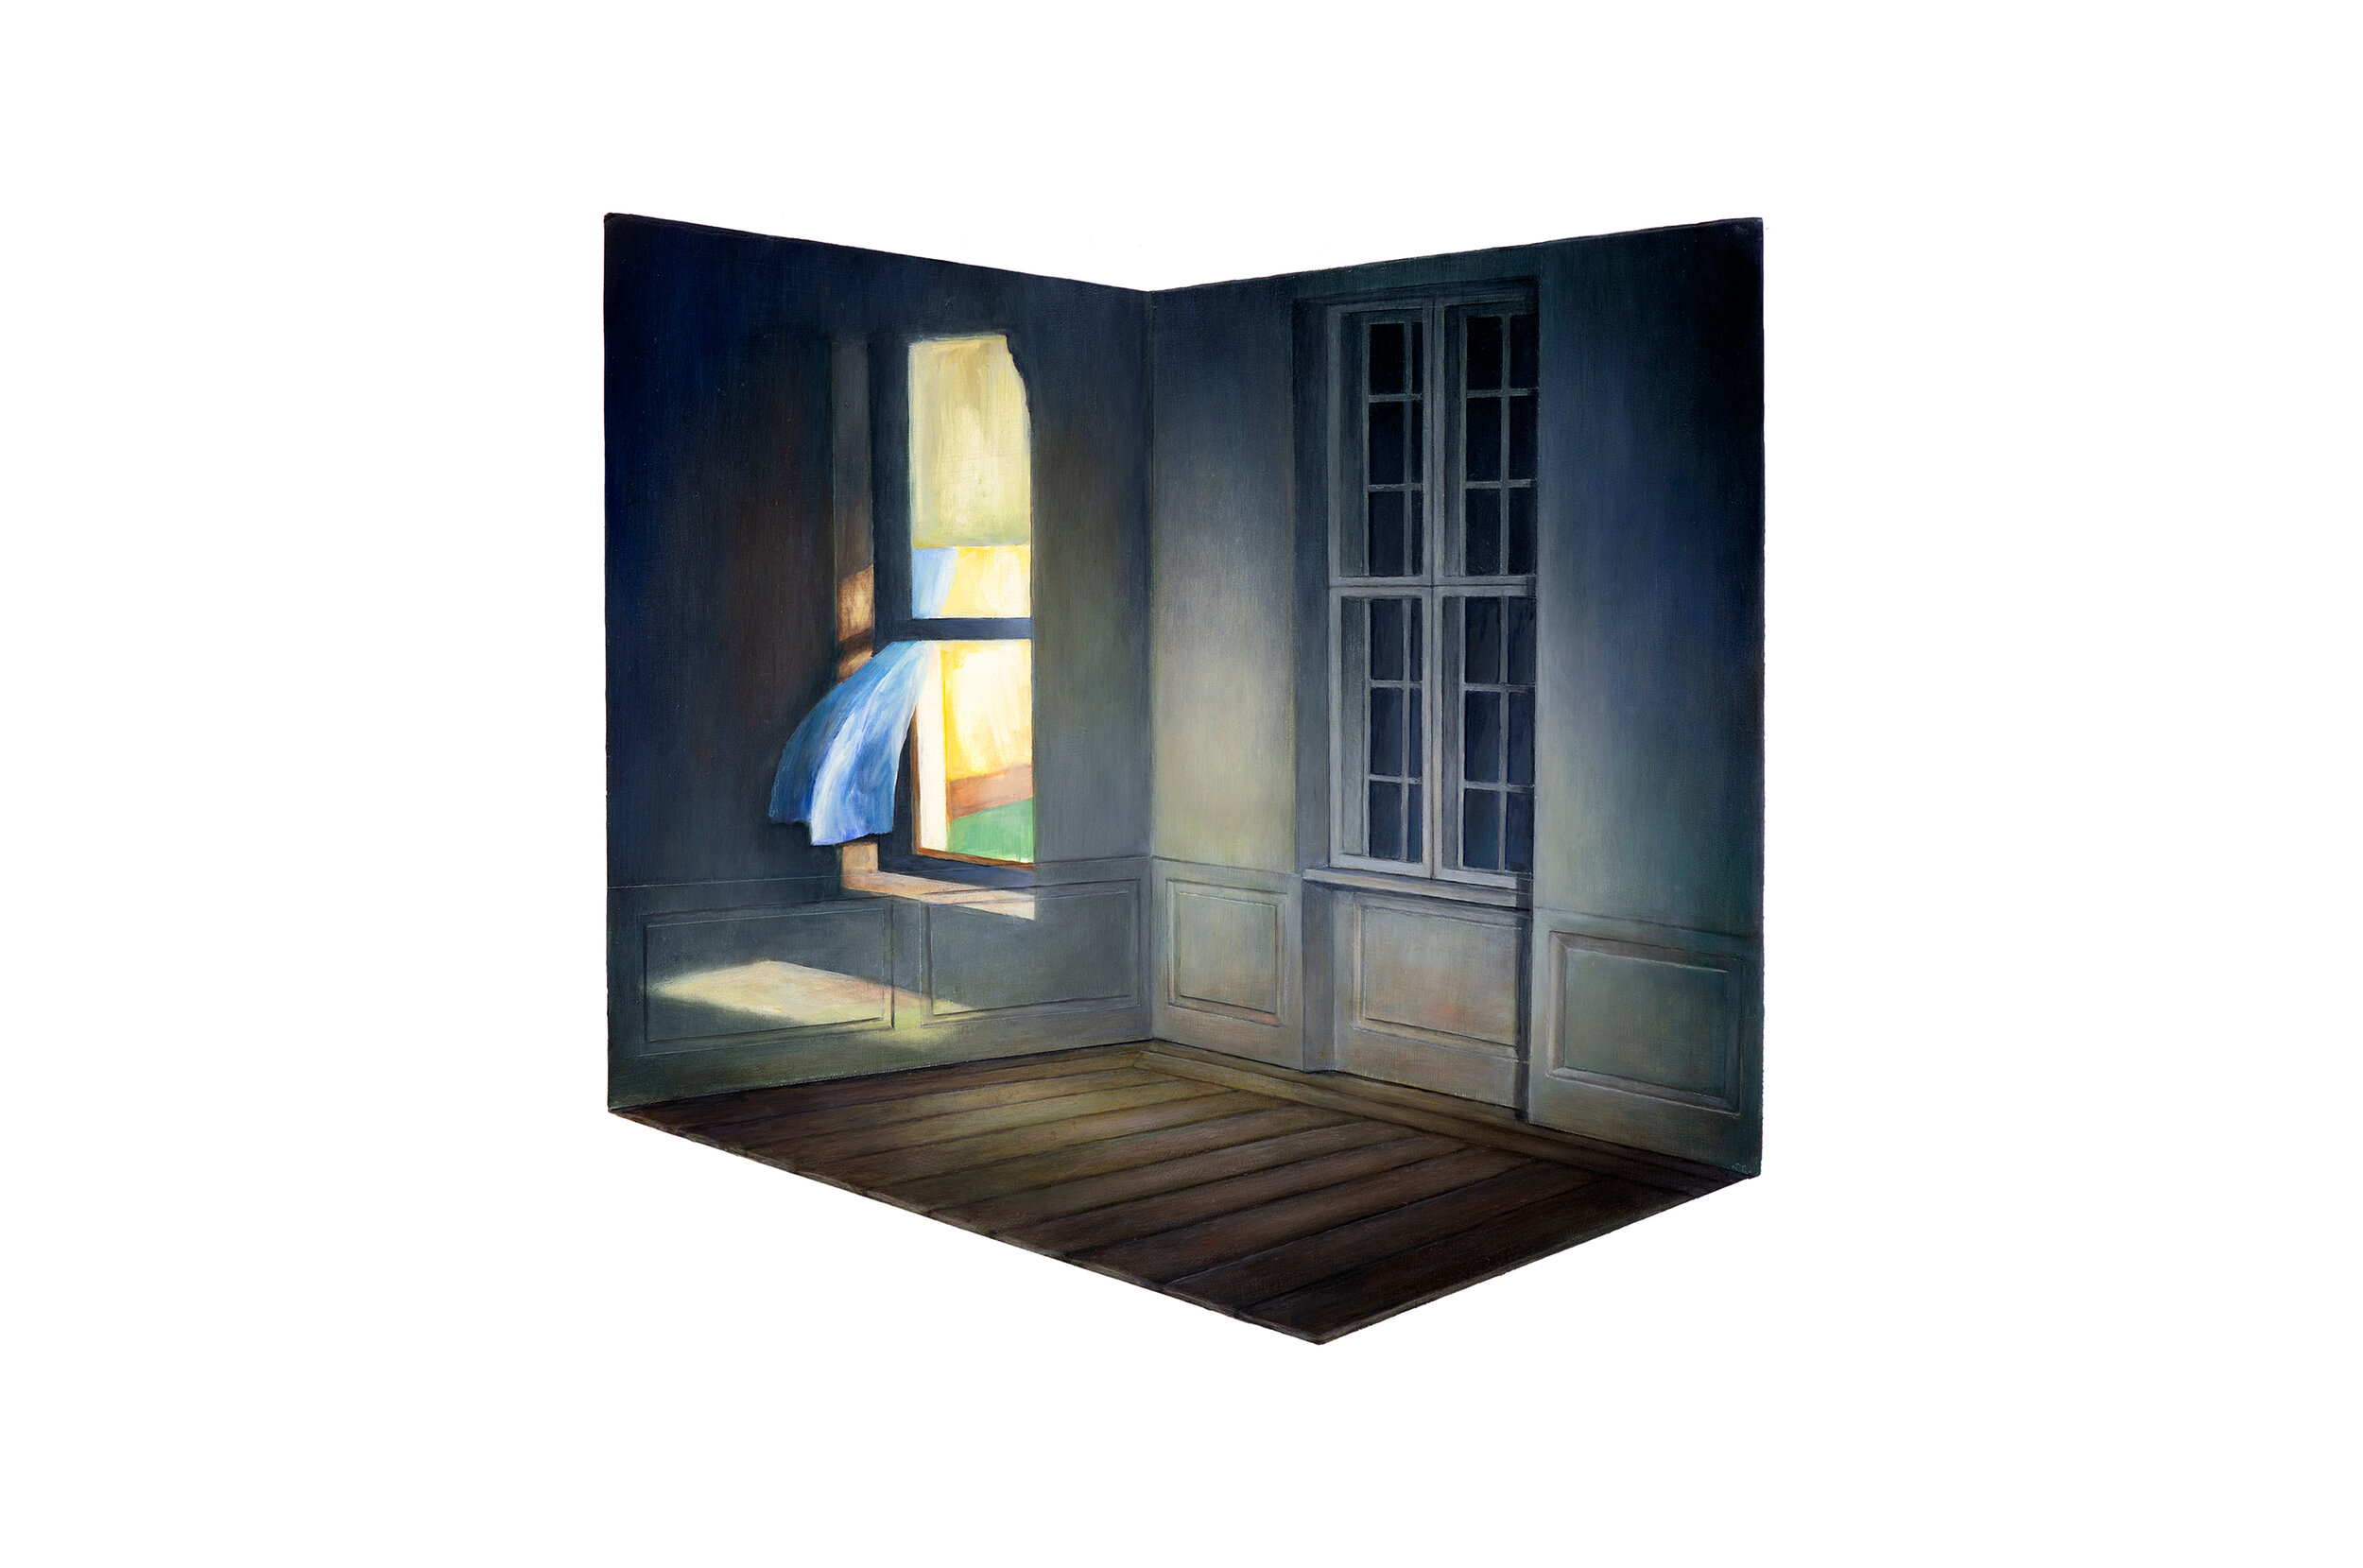   Edward Hopper’s “Night Windows” Projected over Model of Hammershøi’s Room   2019  Oil on shaped and raised relief panel  14.5 x 15 inches 